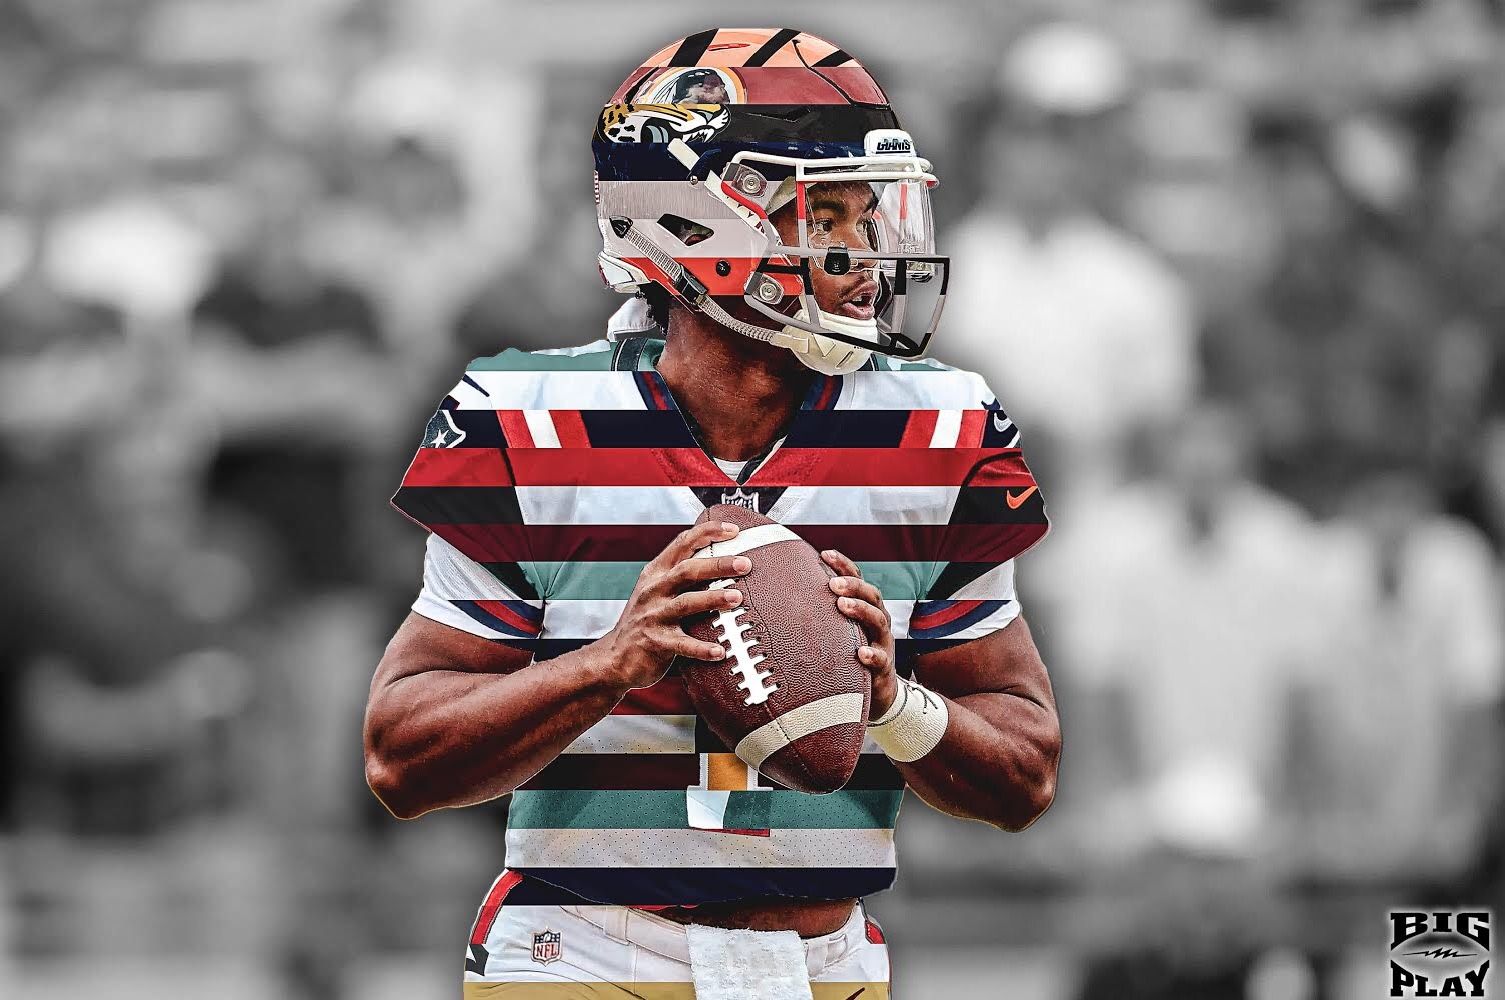 What's Next For Kyler Murray?